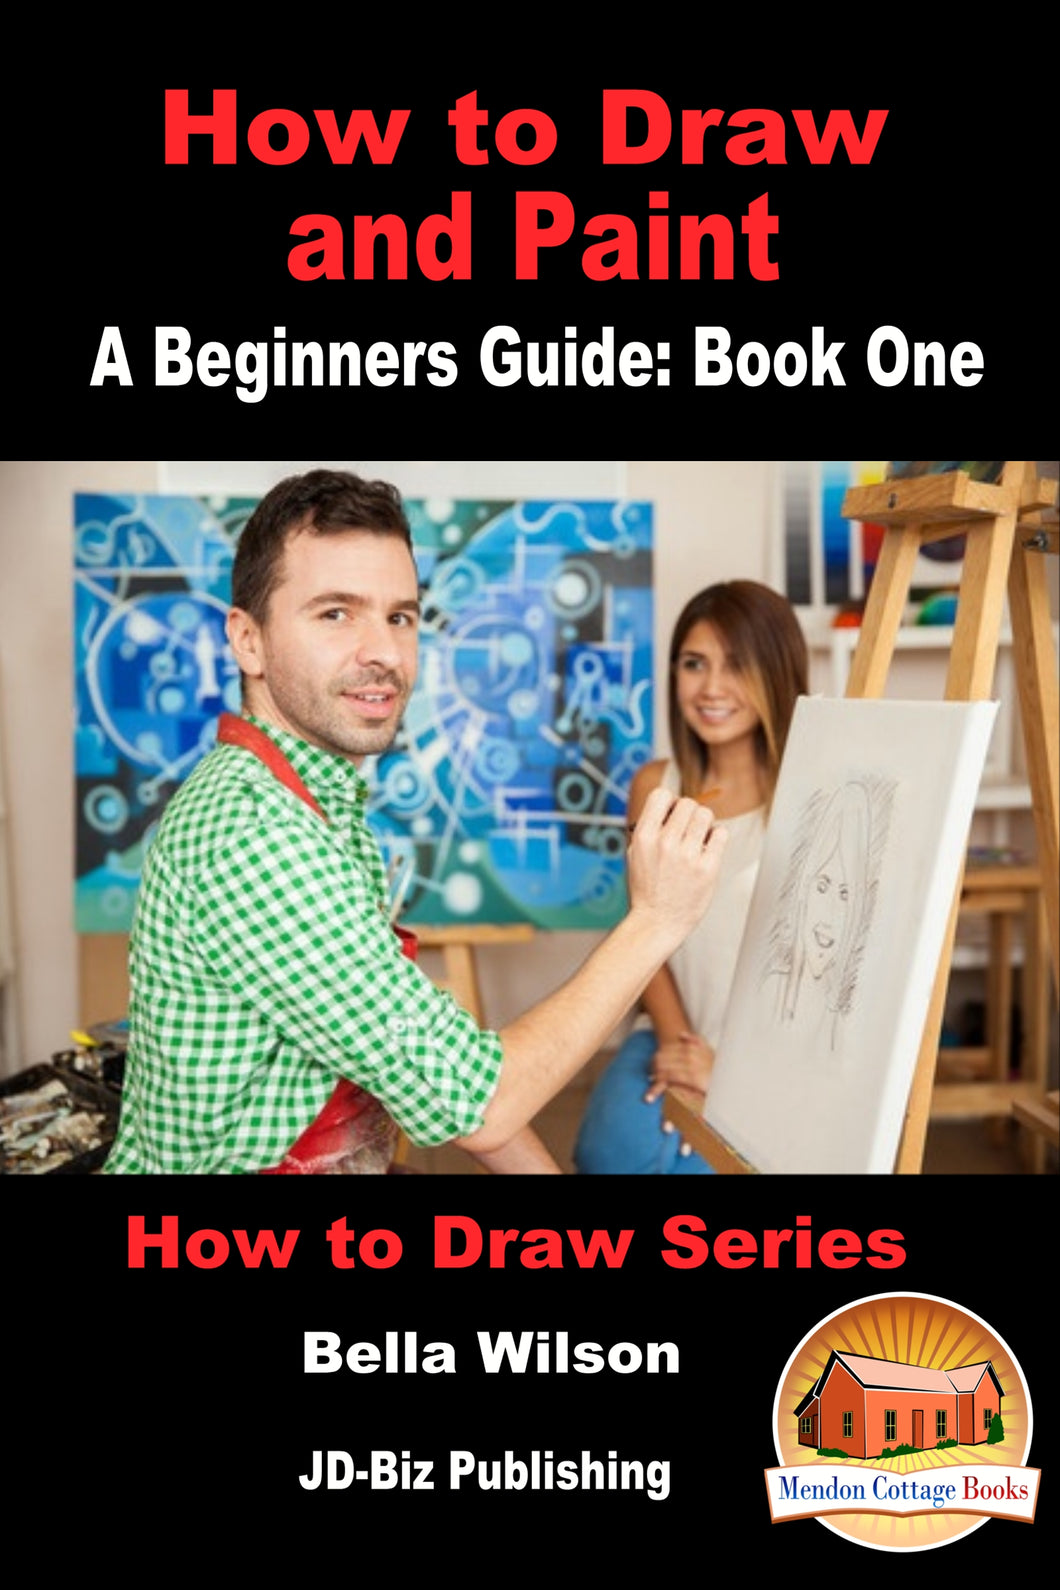 How to Draw and Paint - A Beginners Guide: Book One